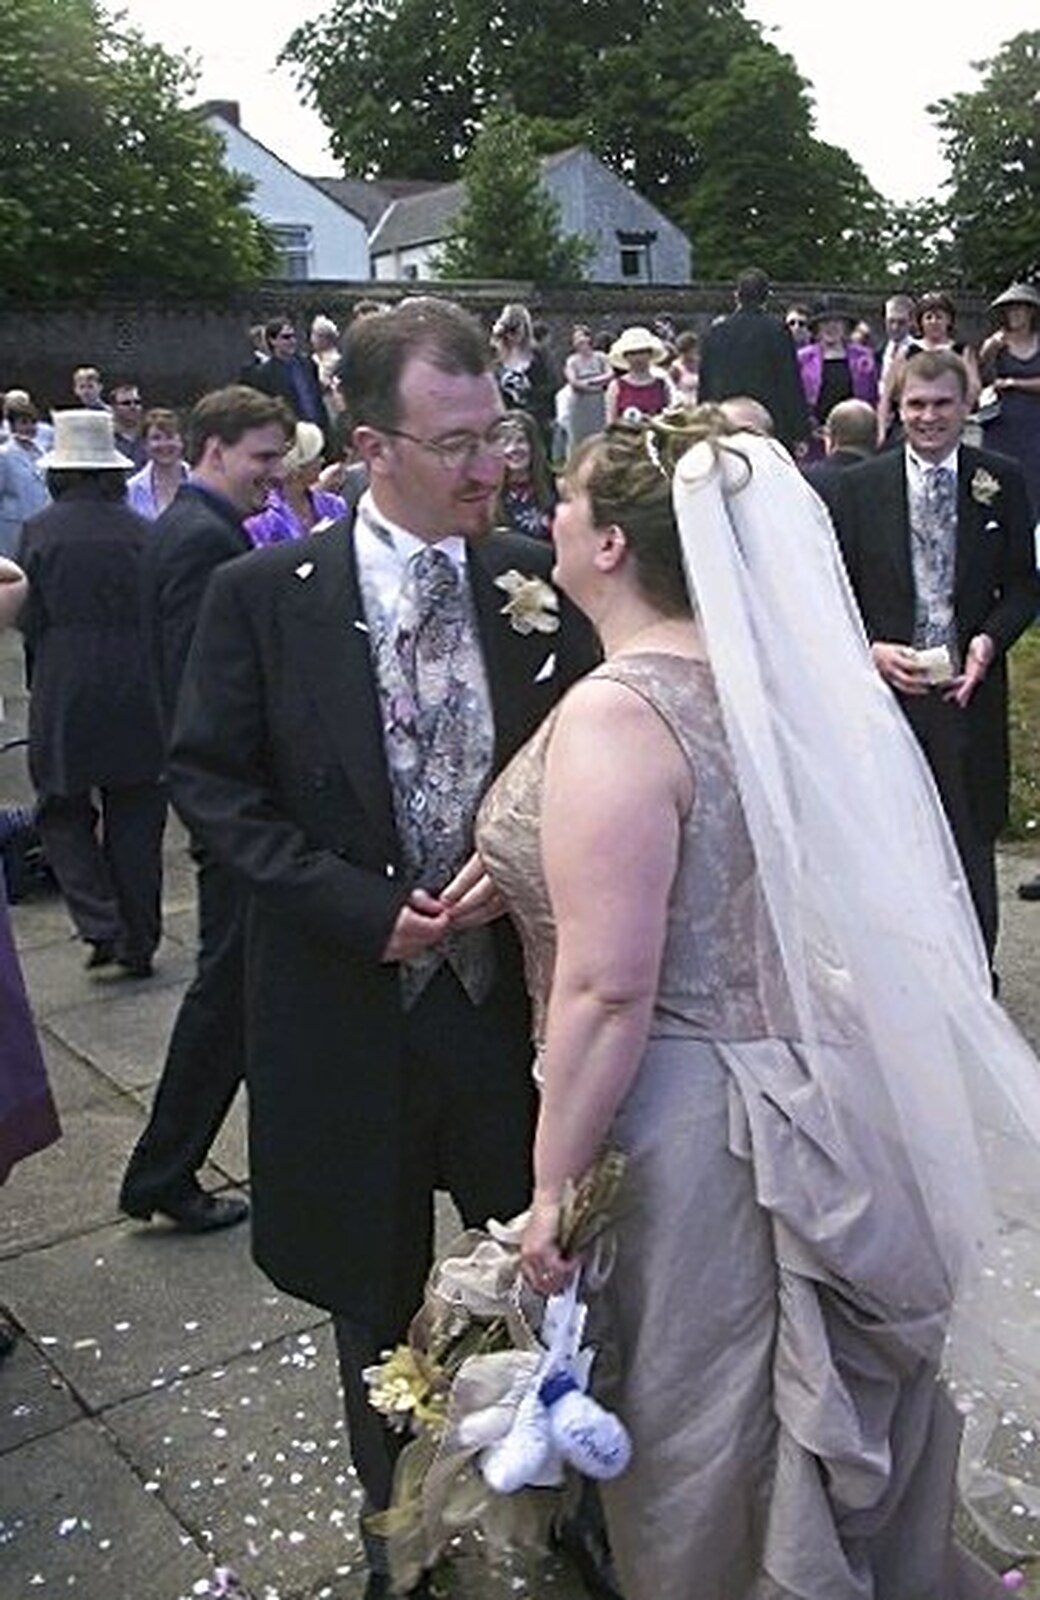 Phil and Lisa from Phil and Lisa's Wedding, Woolverston Hall, Ipswich, Suffolk - 1st July 2001